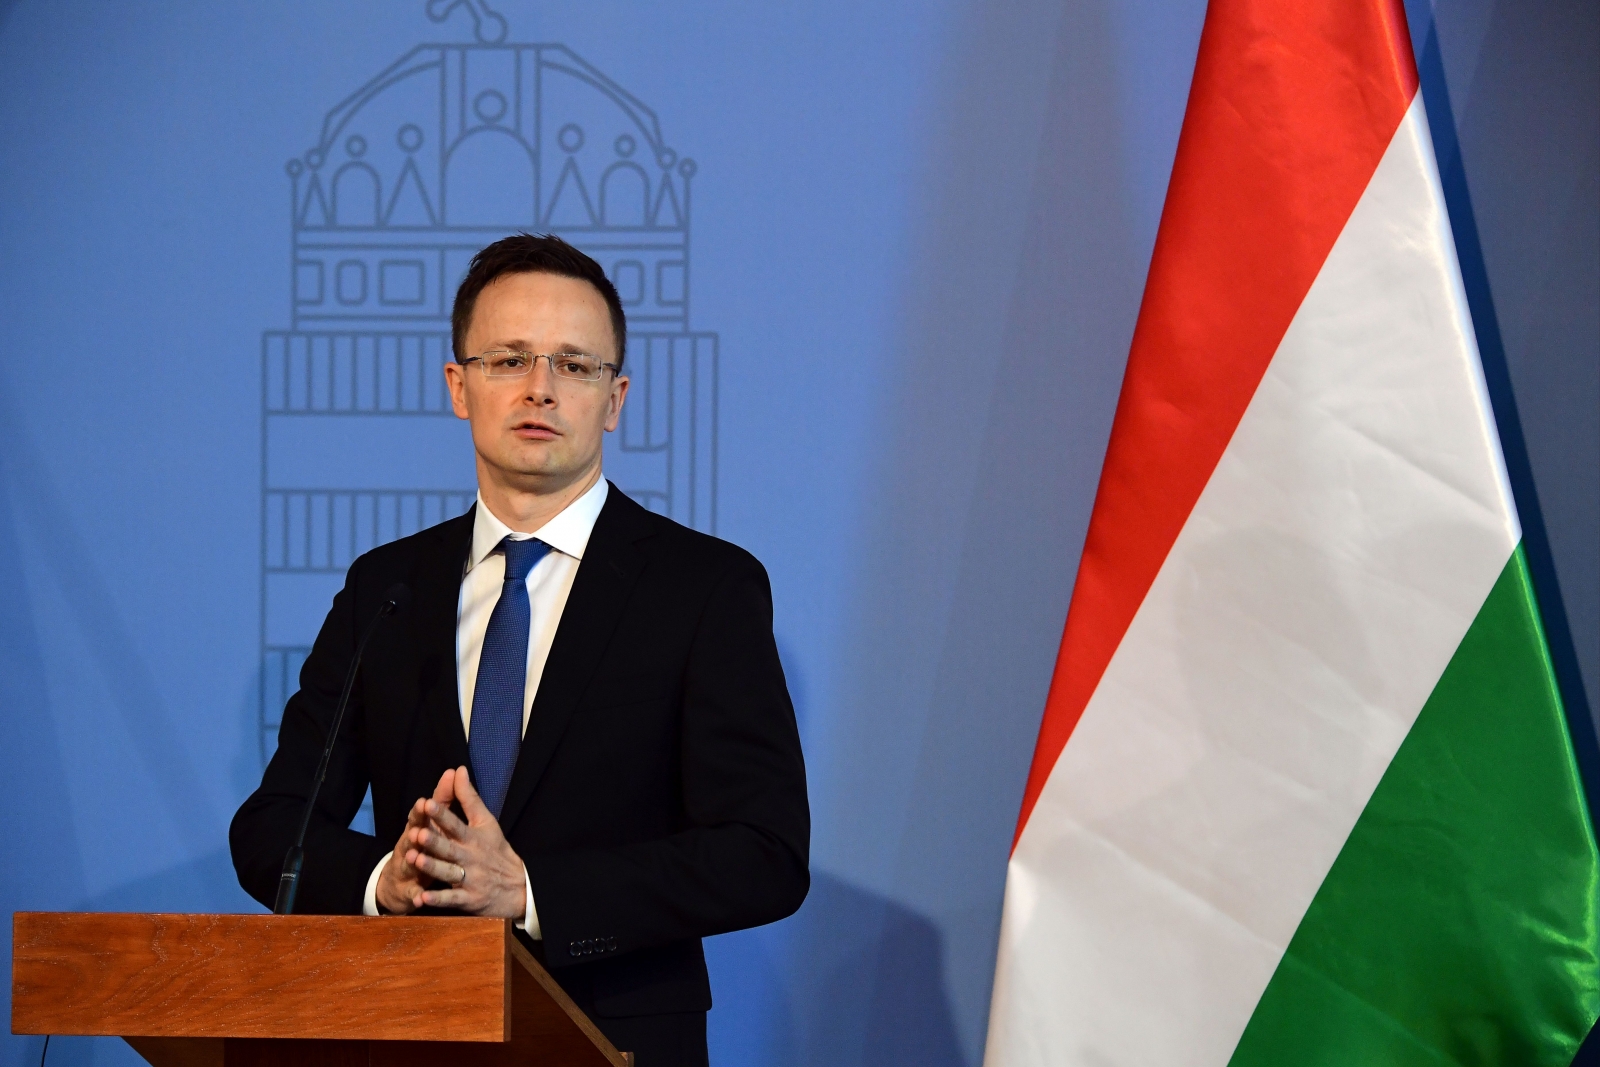 EU referendum: Hungary to seek India's help for businesses in the UK after Brexit1600 x 1067